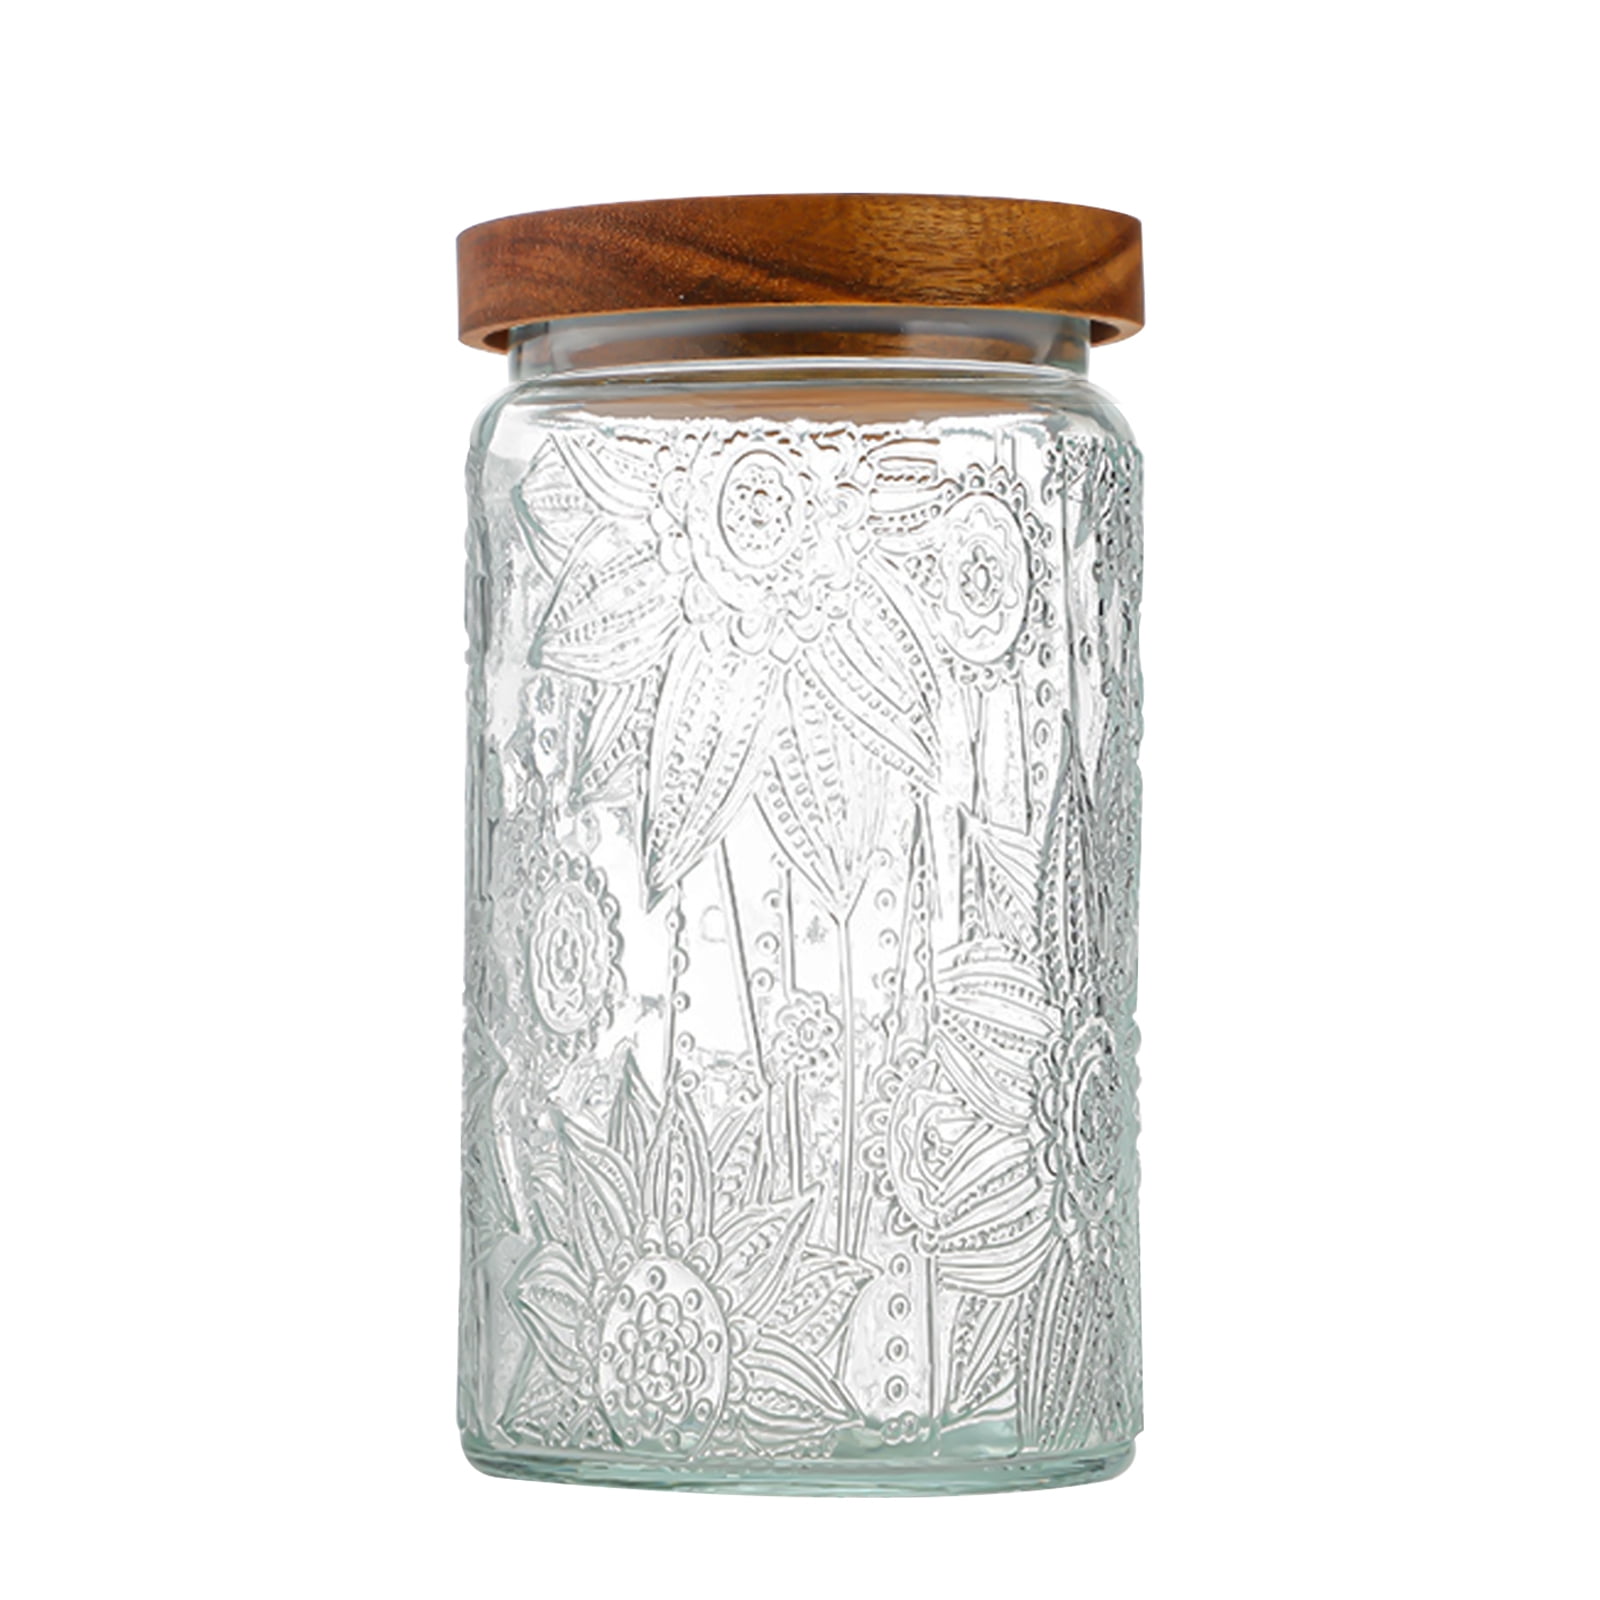 Glass Jars With Screw Top Lids 4 Fl Oz Clear Empty Decorative Storage,  Container for Herbs, Tea, Bath Salts, DIY Beauty Canning Kitchen Cans 